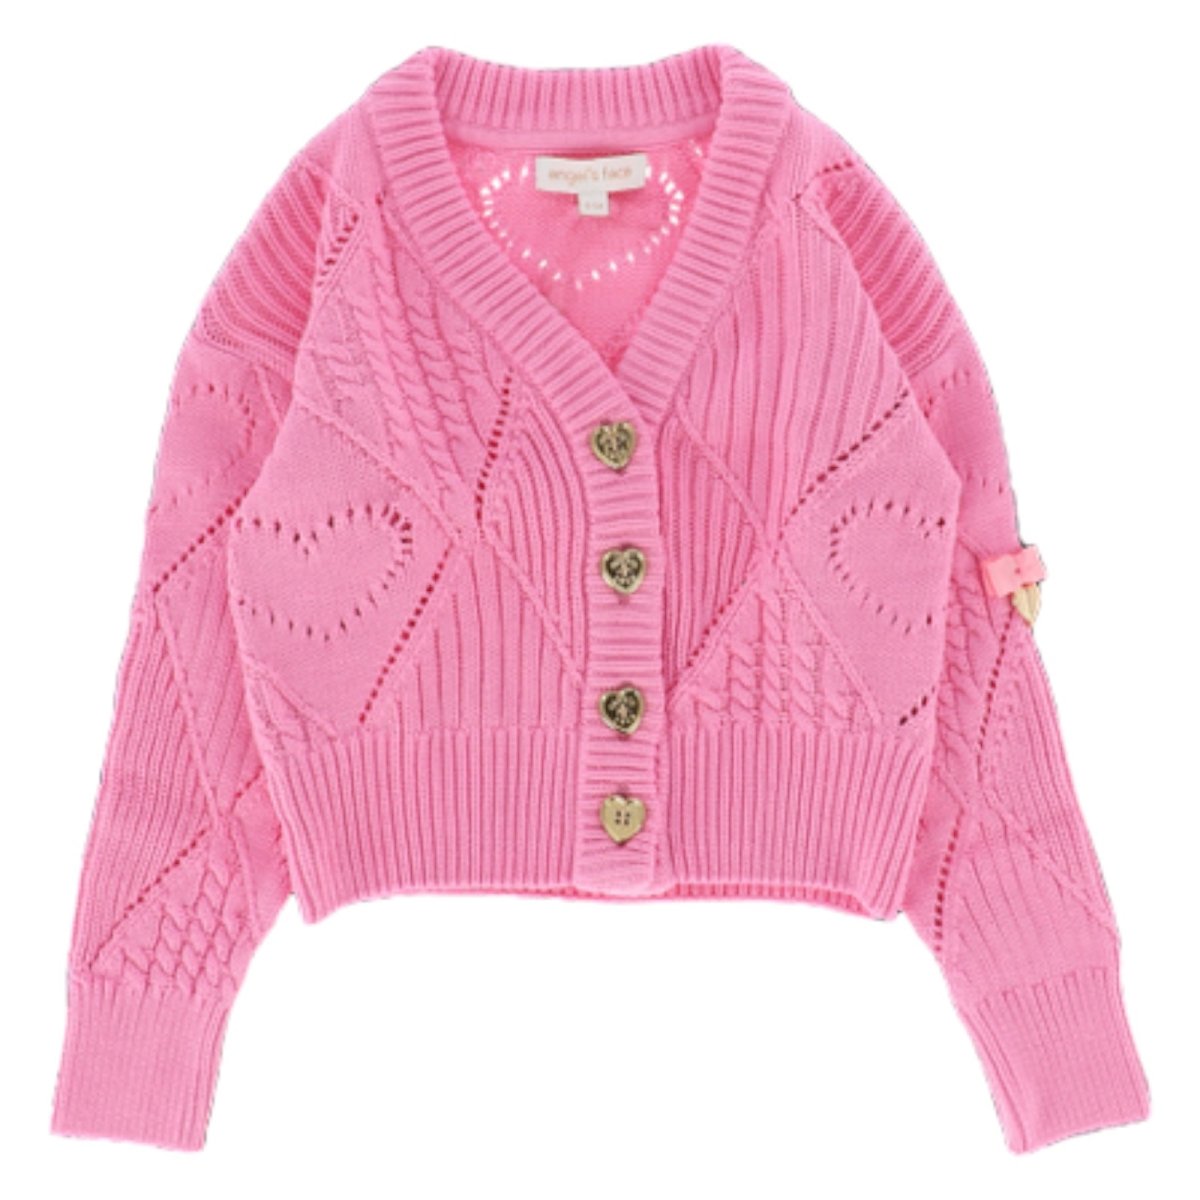 LOIS KNITTED HEART CARDIGAN - CARDIGANS